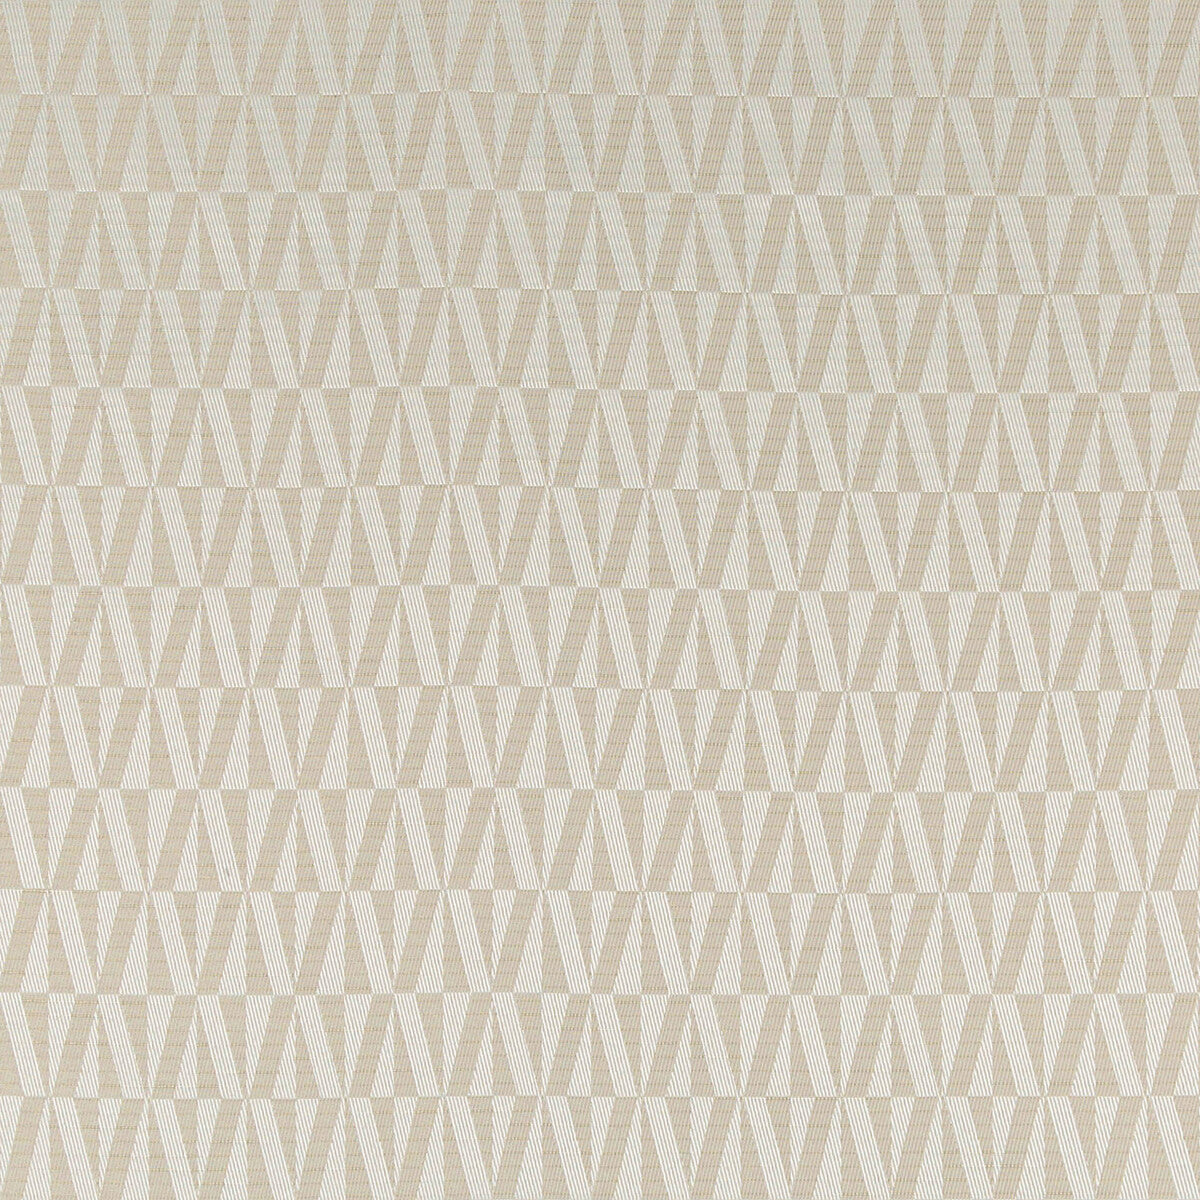 Payton fabric in flax color - pattern 4656.16.0 - by Kravet Contract